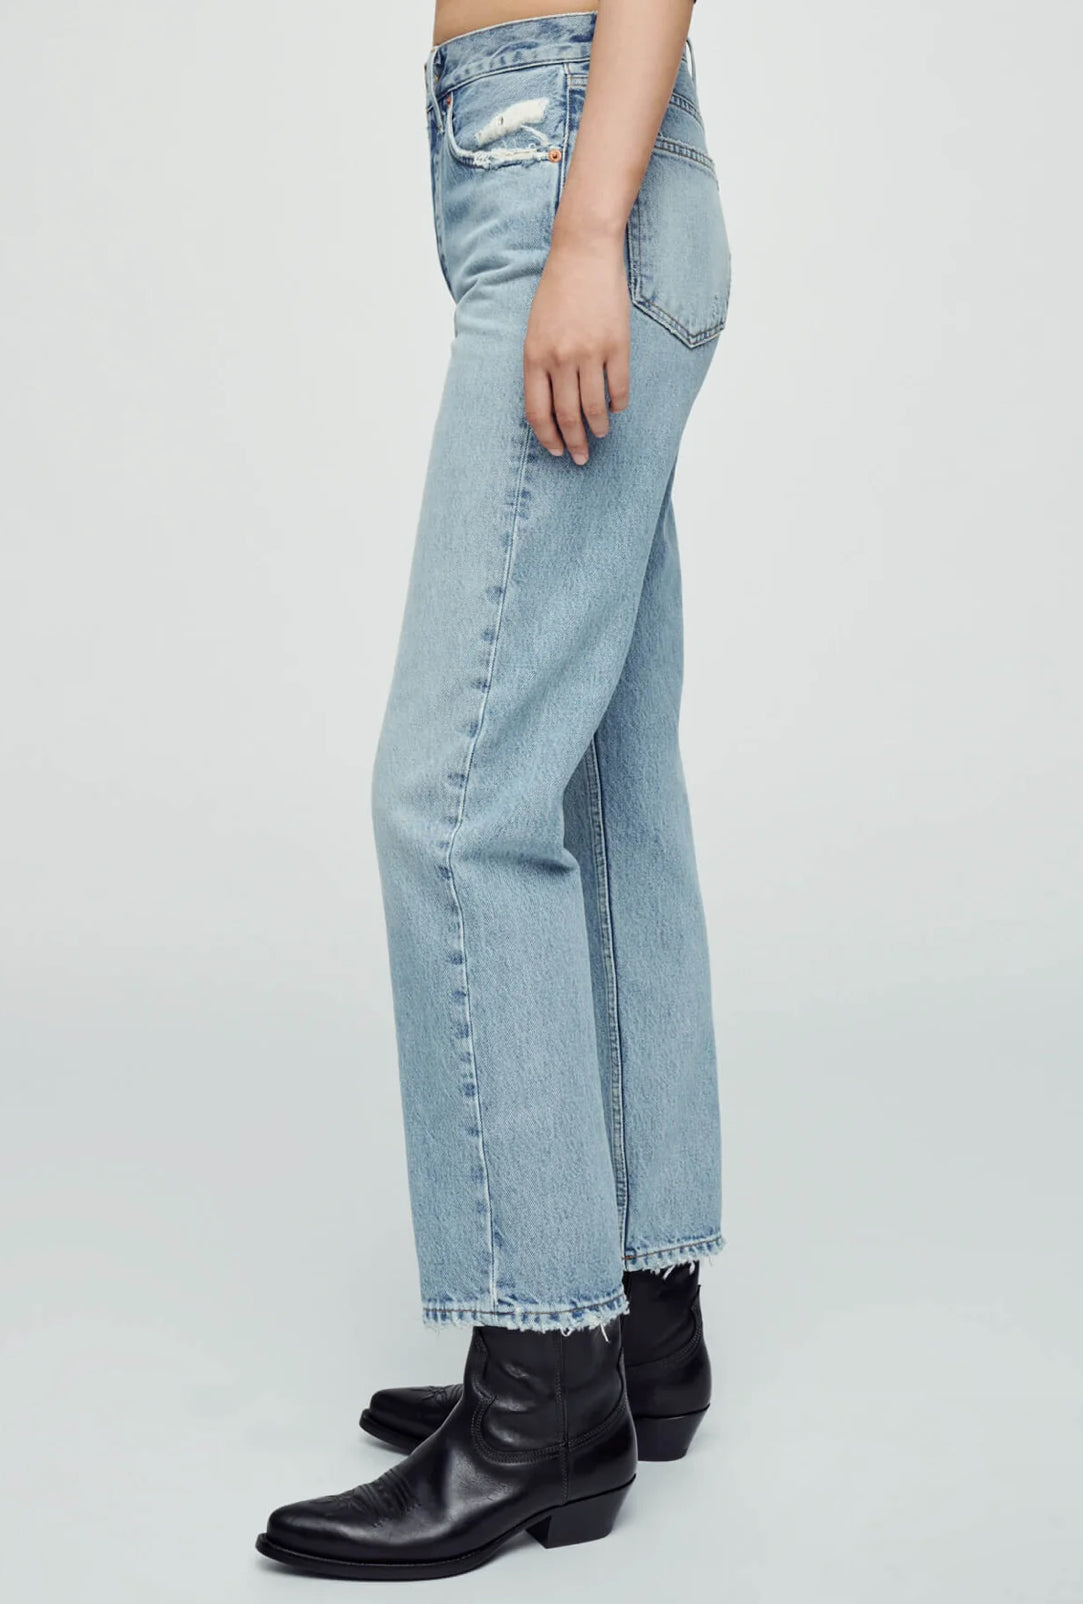 70s Stove Pipe Jeans 1